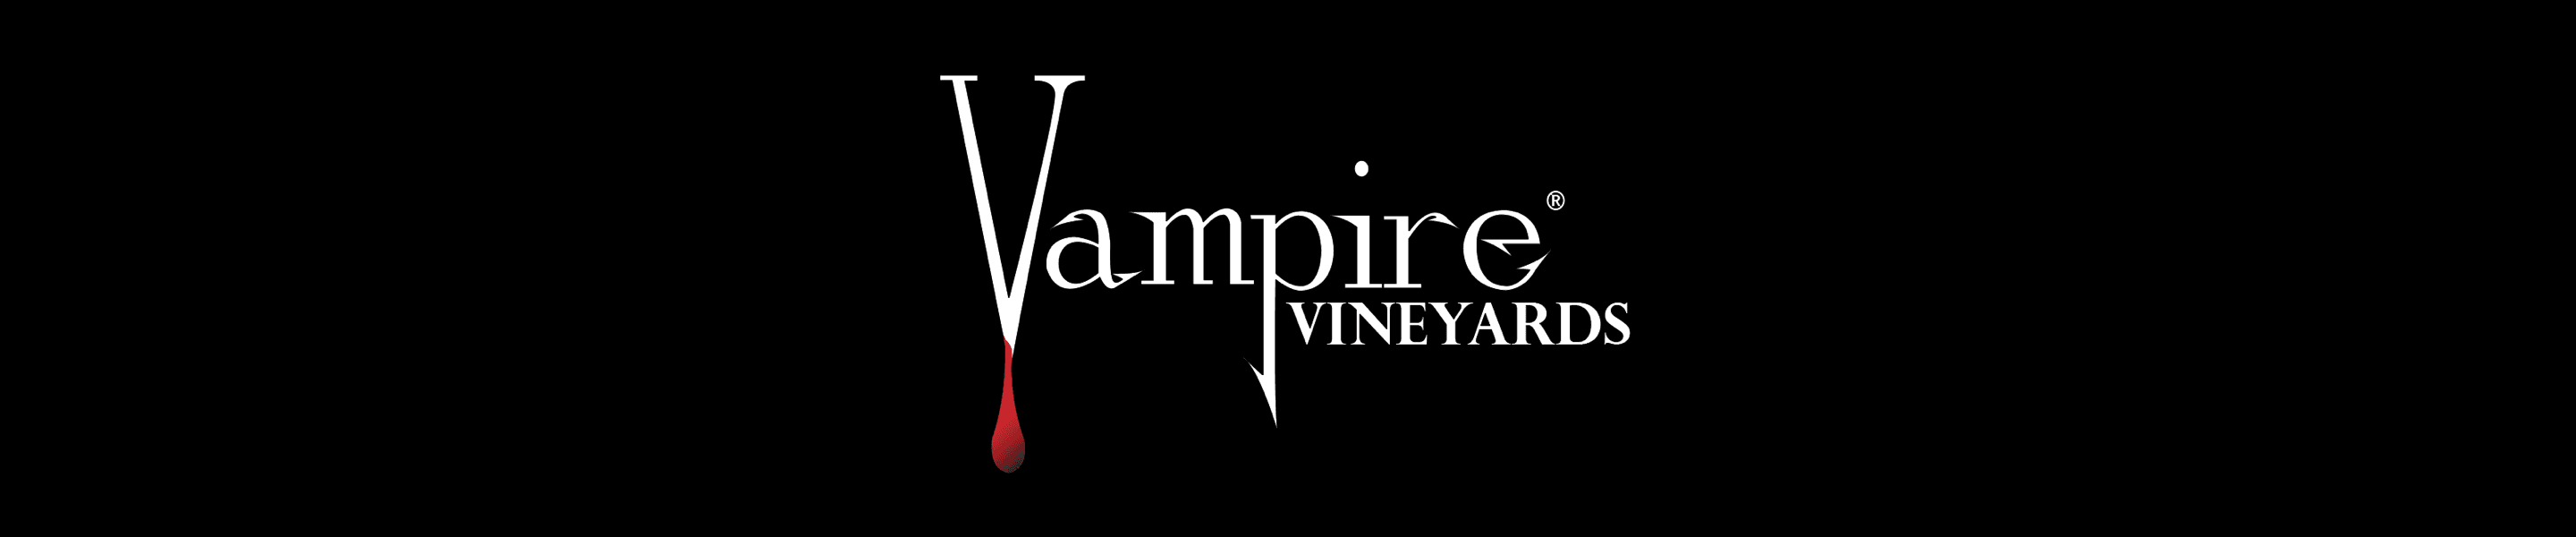 Vampire Vineyards has been crafting high quality wines since 1988.  Our award-winning flagship brand, Vampire Vineyards, is produced in Napa from premium California fruit.  We source our fruit from distinguished vineyards in the most regarded appellations of California.  Our variety of vineyard locations brings together a diverse palette of fruit that allows us to produce rich wines true to varietal character in a modern California style. 